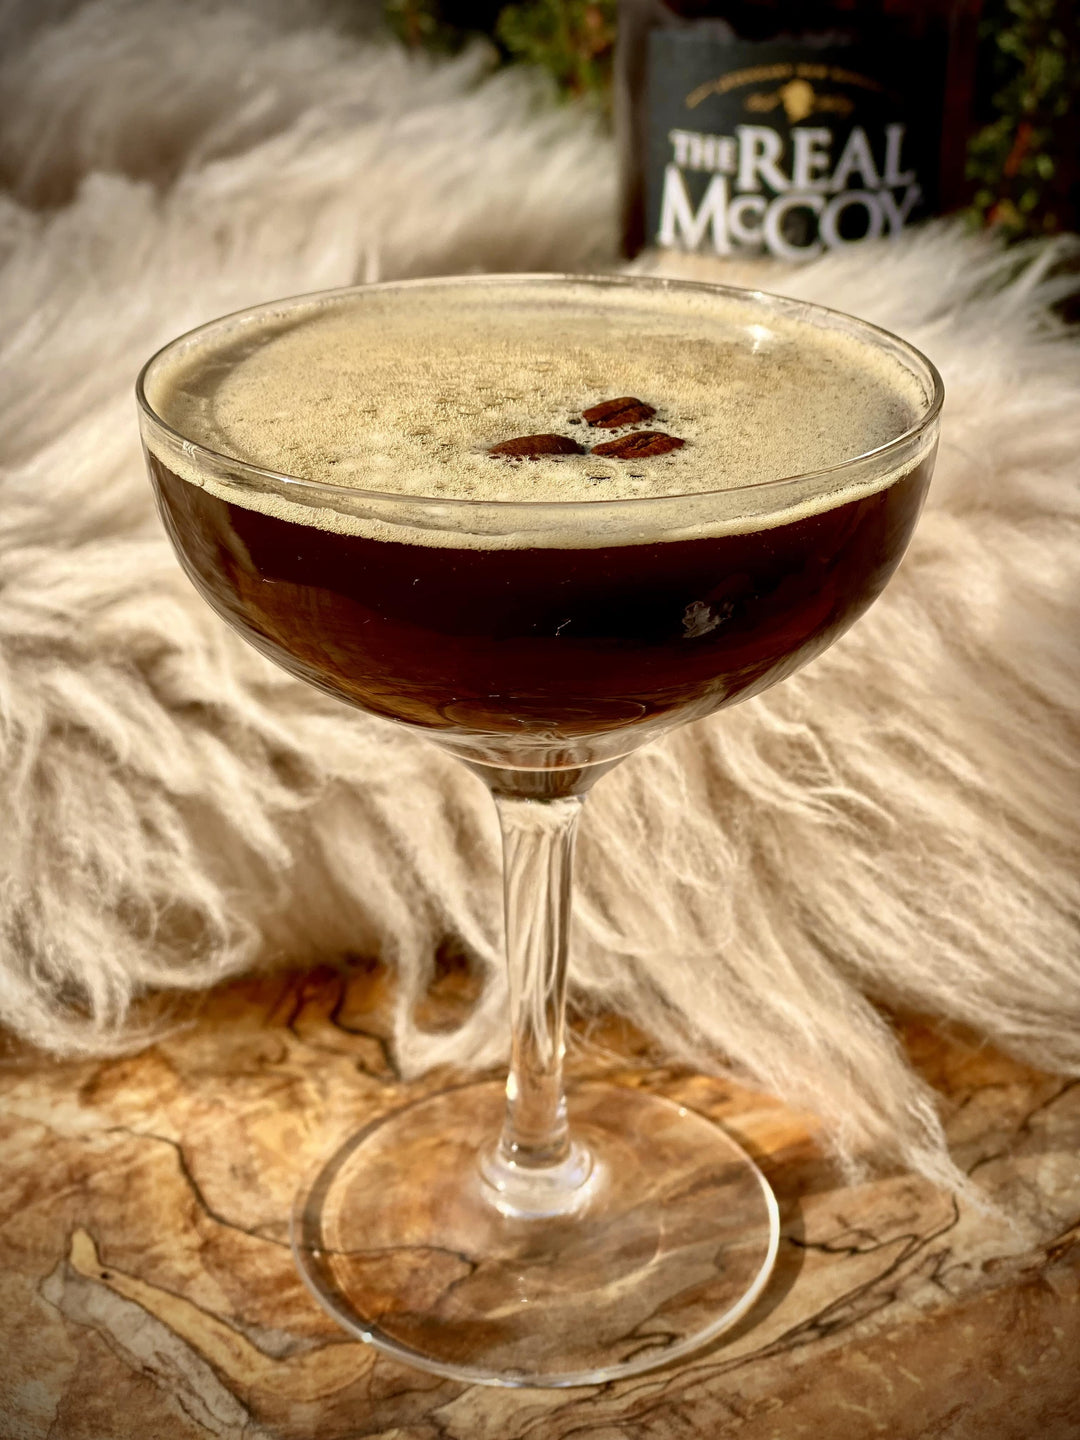 Espresso rumtini with 3 coffee beans floating on top and bottle of Real McCoy 12 year aged rum in the background